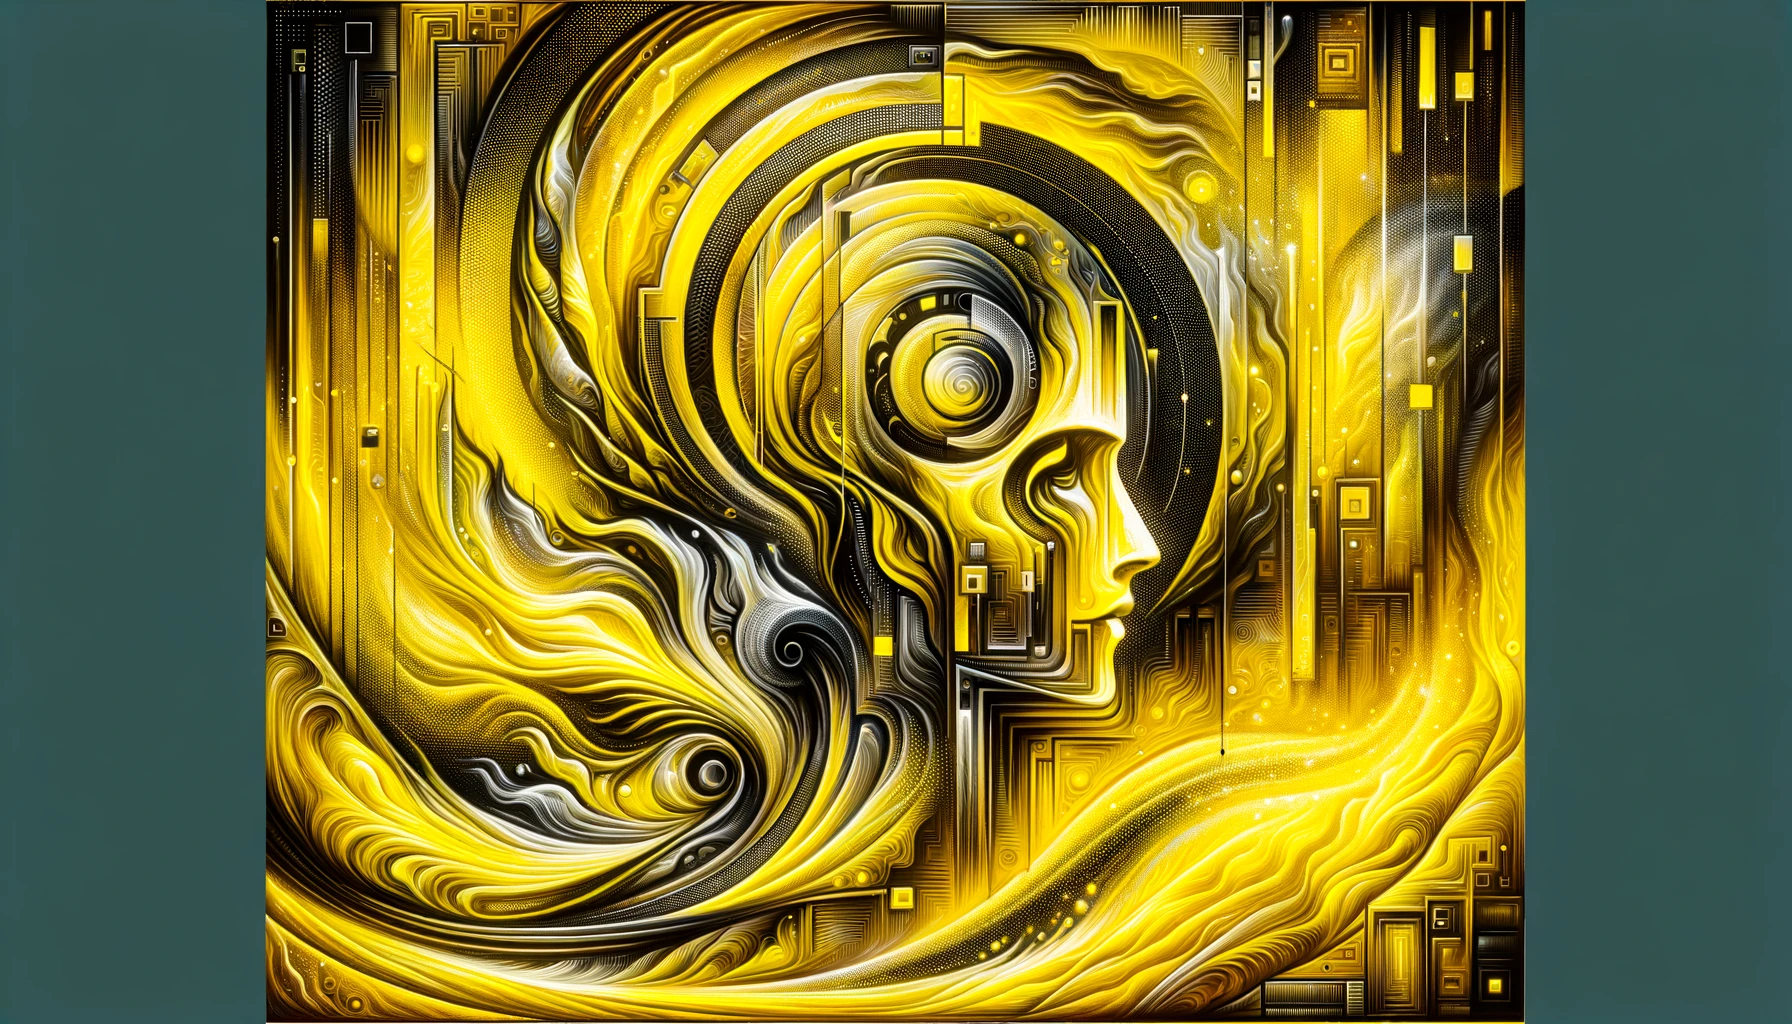 DALL-E-2024-01-19-23.16.43---A-hyper-stylized-artistic-representation-with-a-dominant-yellow-color-theme--blending-abstract-art-and-futuristic-concepts.-The-image-is-filled-with-e